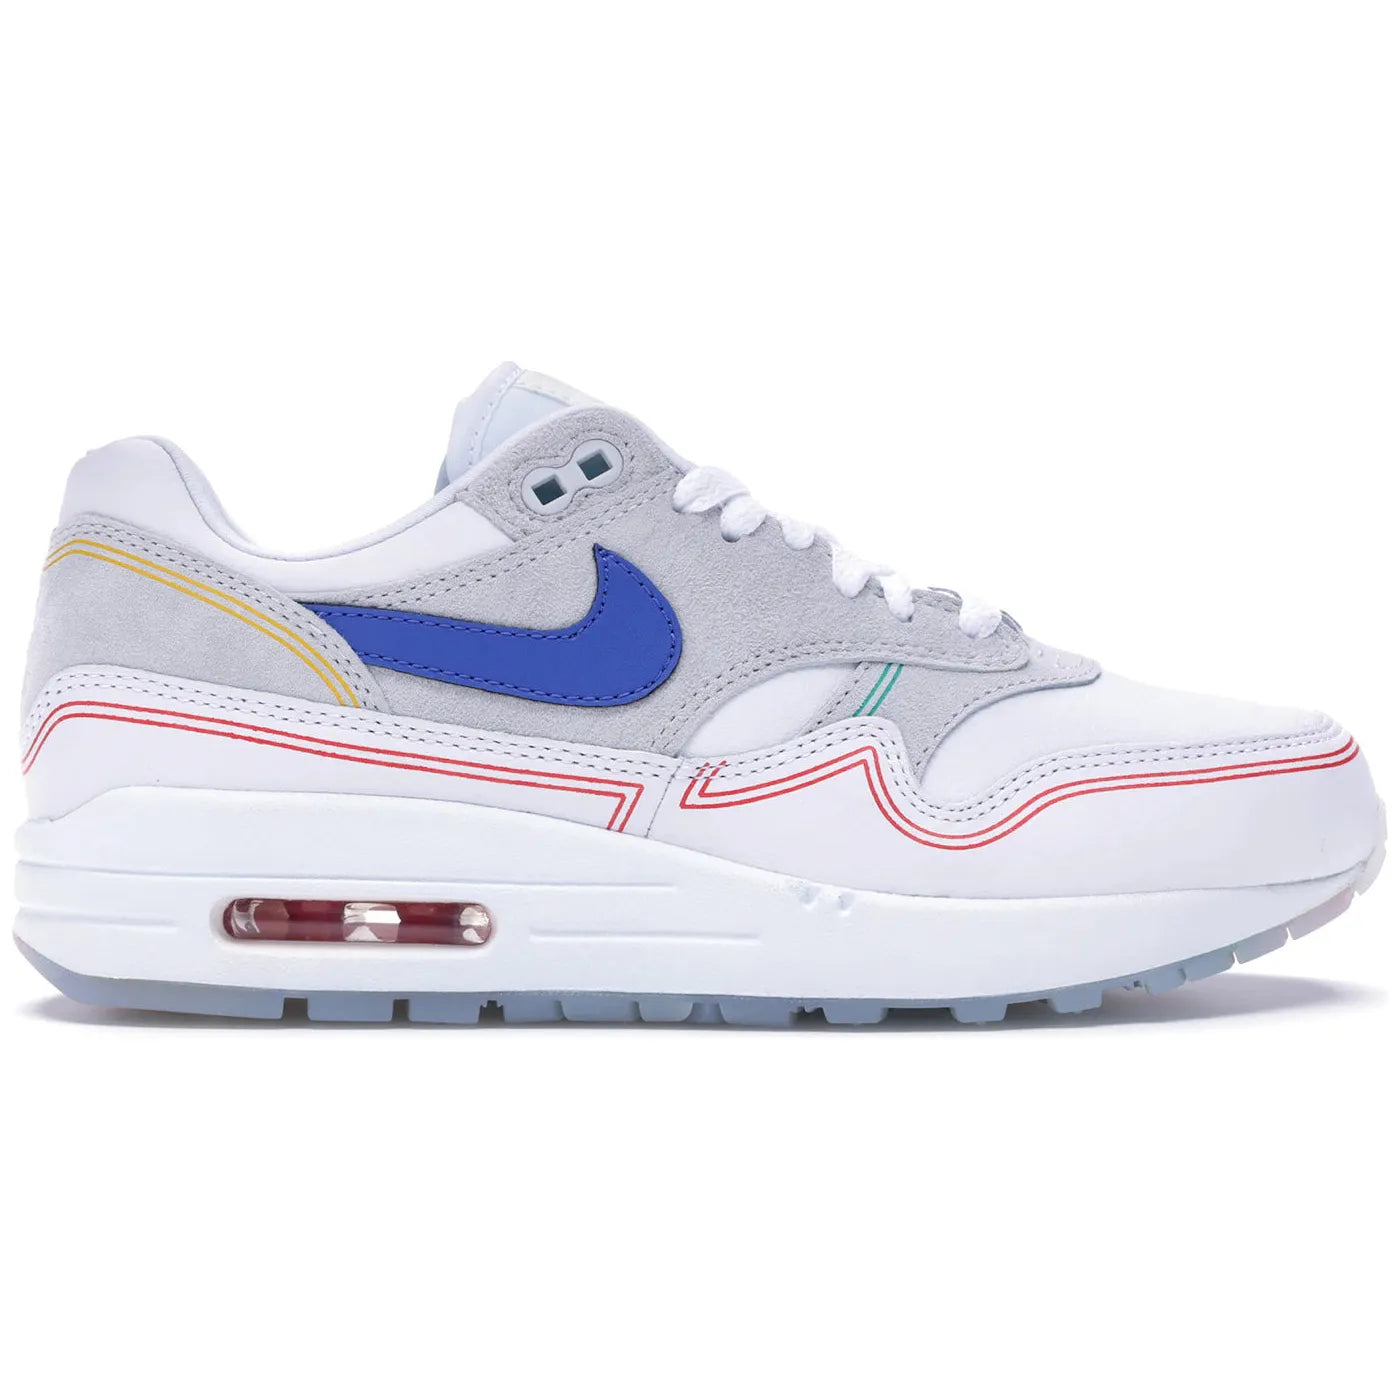 Nike - Air Max 1 Pompidou Centre Day